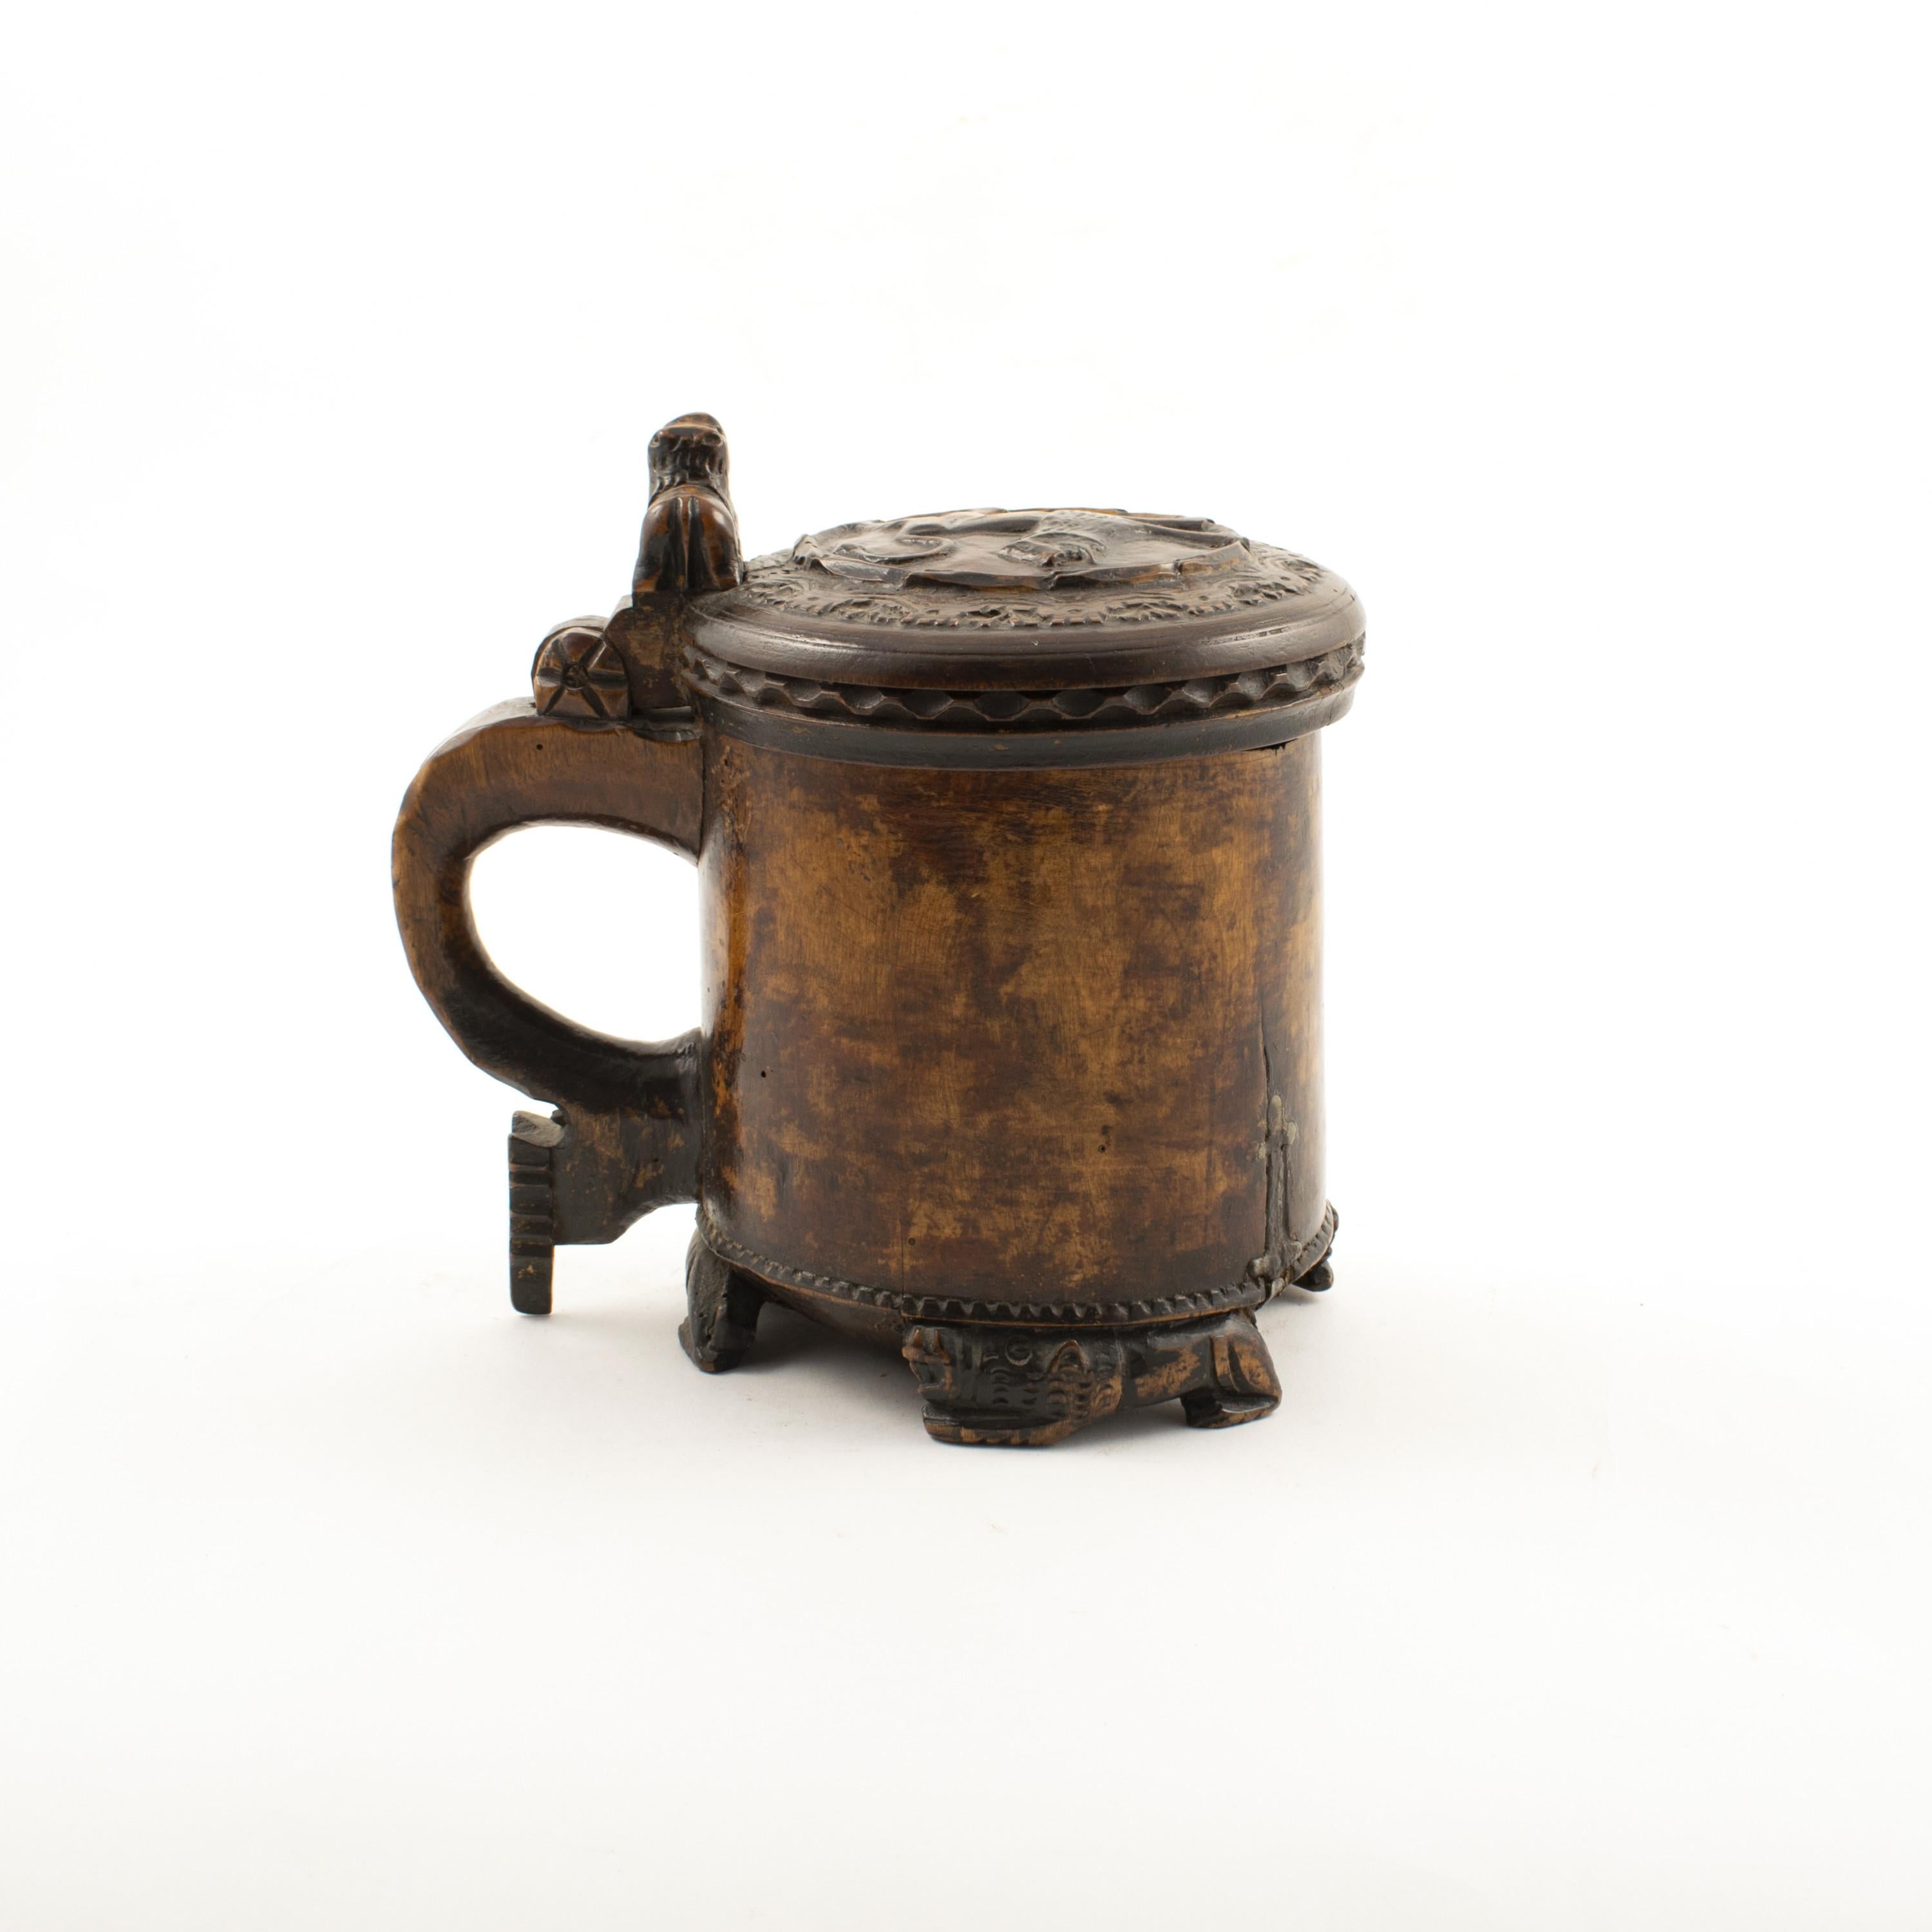 Norwegian peg tankard in birch wood with carved lion motif on top of lid, thumb piece and feet.
Original condition with natural patina,
Norway, 1730-1750.

Provenance from a Danish private collection.